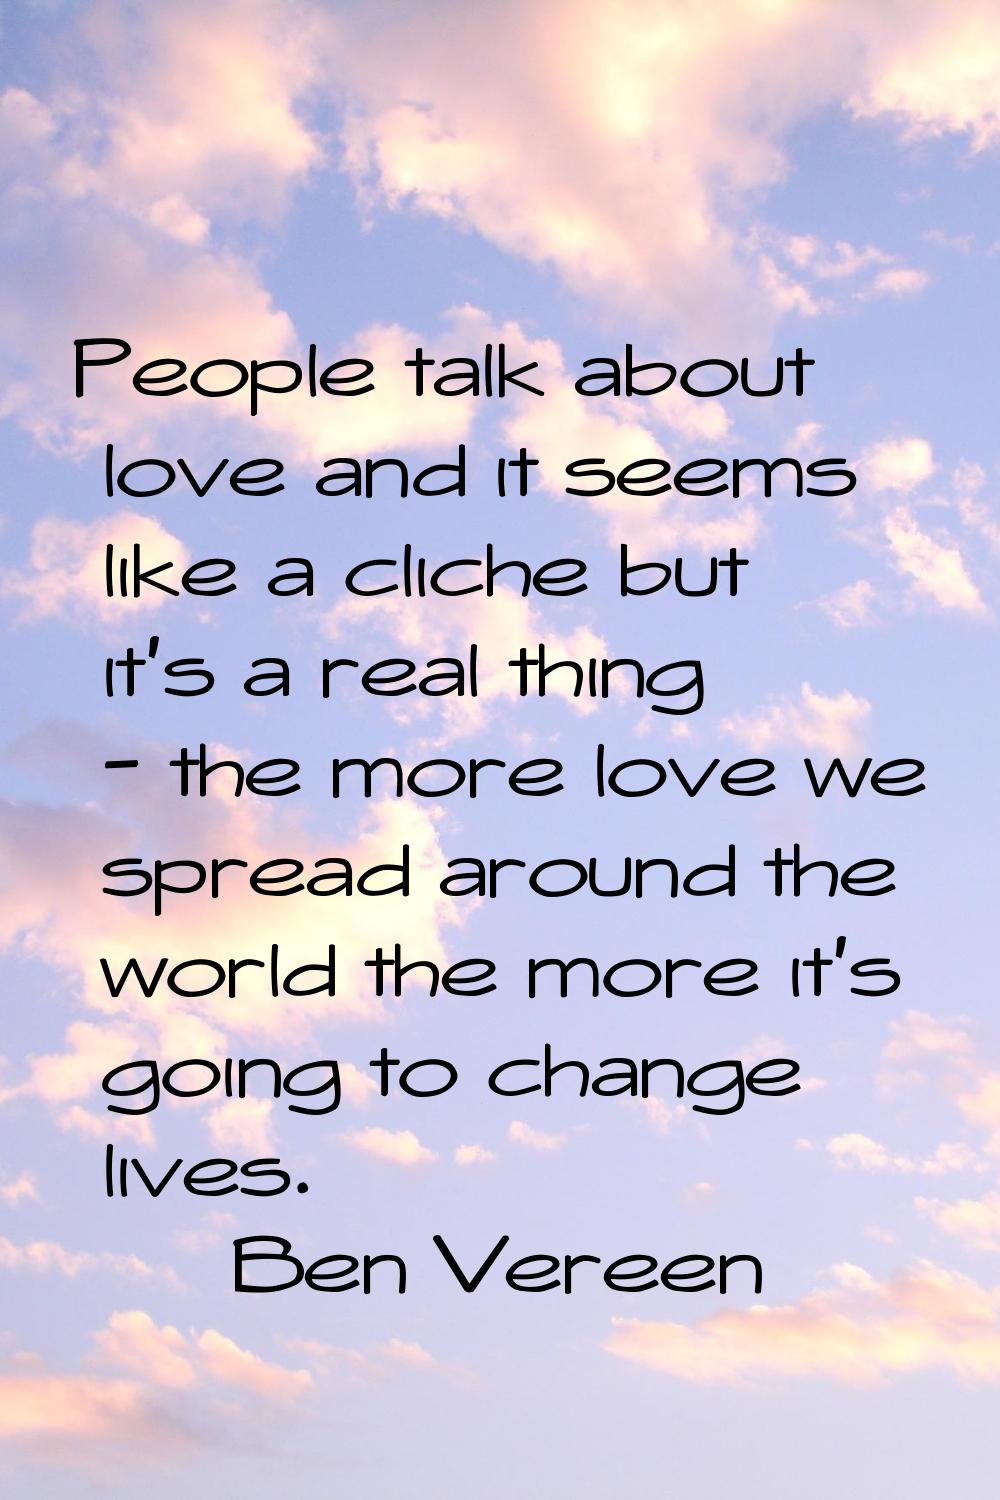 People talk about love and it seems like a cliche but it's a real thing - the more love we spread a